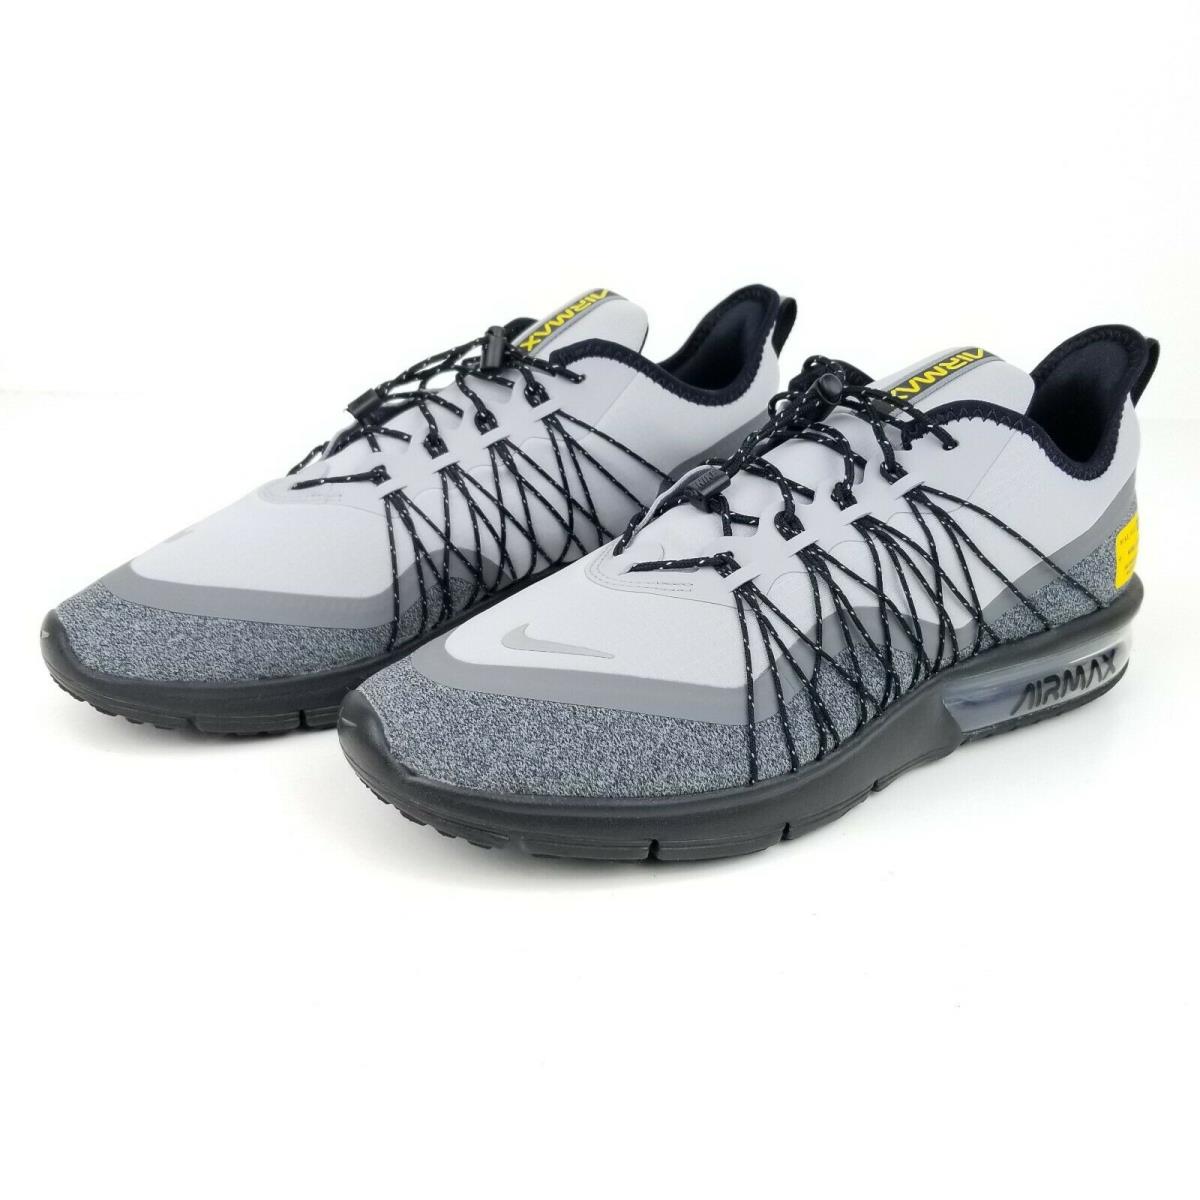 Nike Air Max Sequent 4 Utility Mens Running Shoes Gray AV3236 003 Sizes 8.5-13